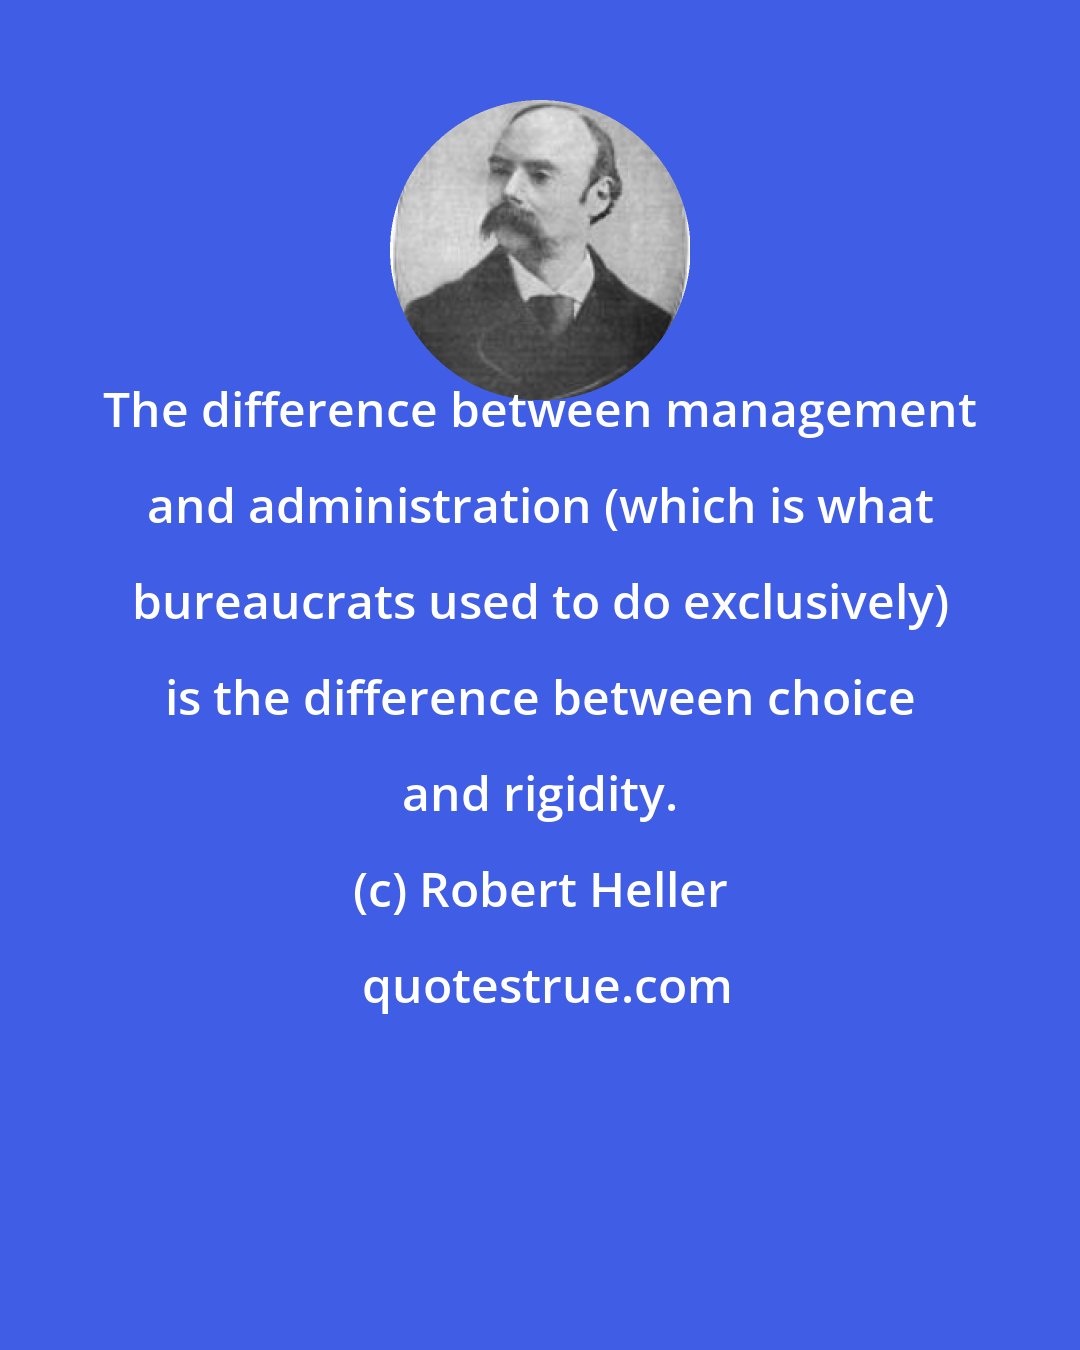 Robert Heller: The difference between management and administration (which is what bureaucrats used to do exclusively) is the difference between choice and rigidity.